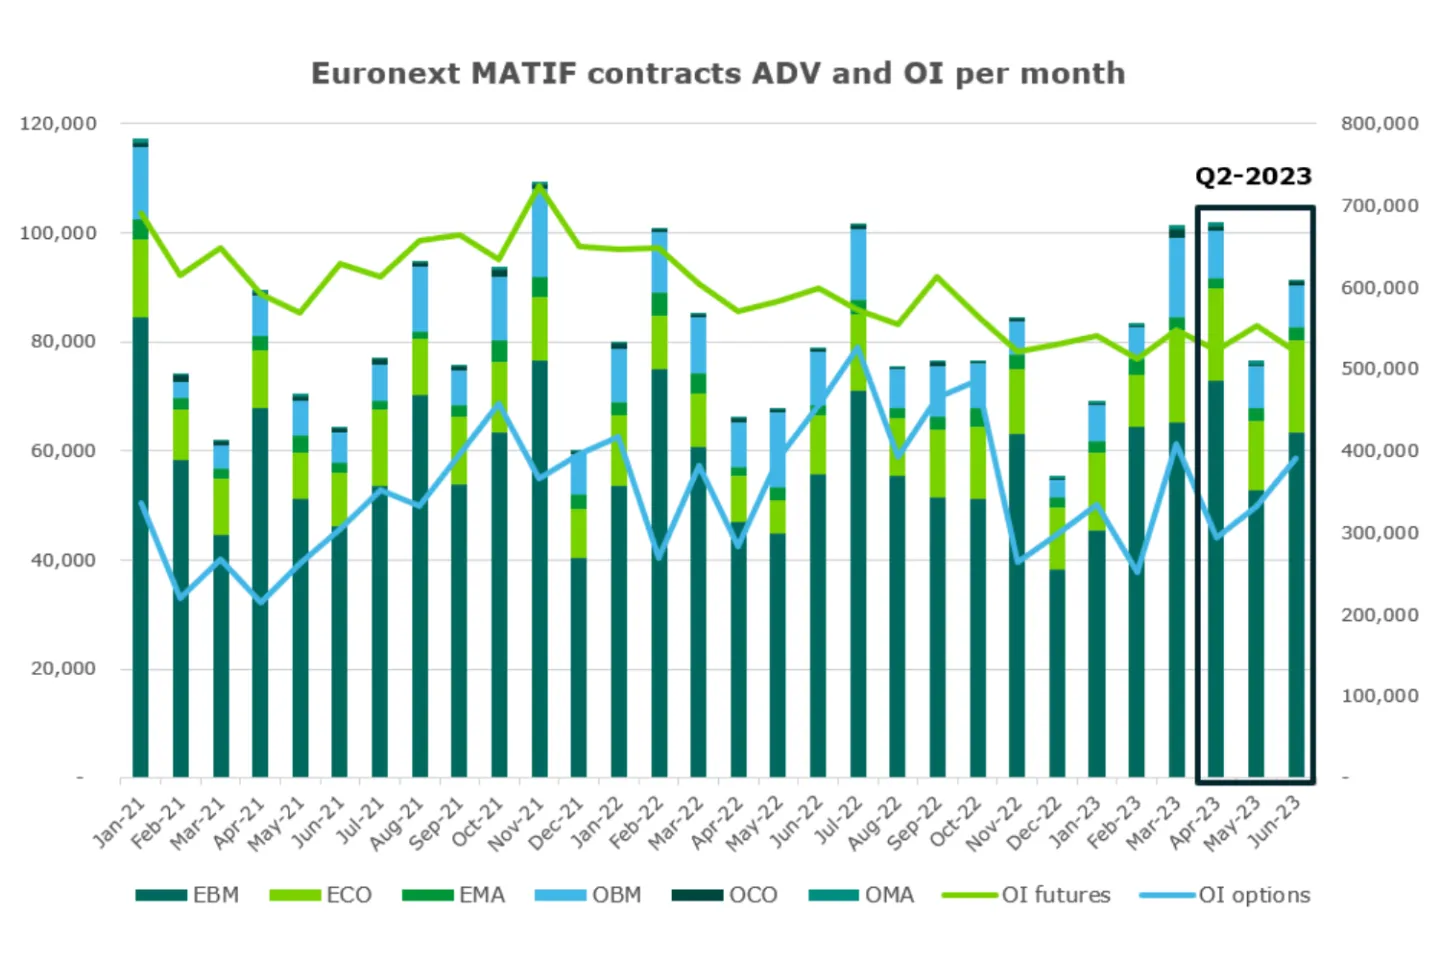 Euronext MATIF contracts ADV and OI per month